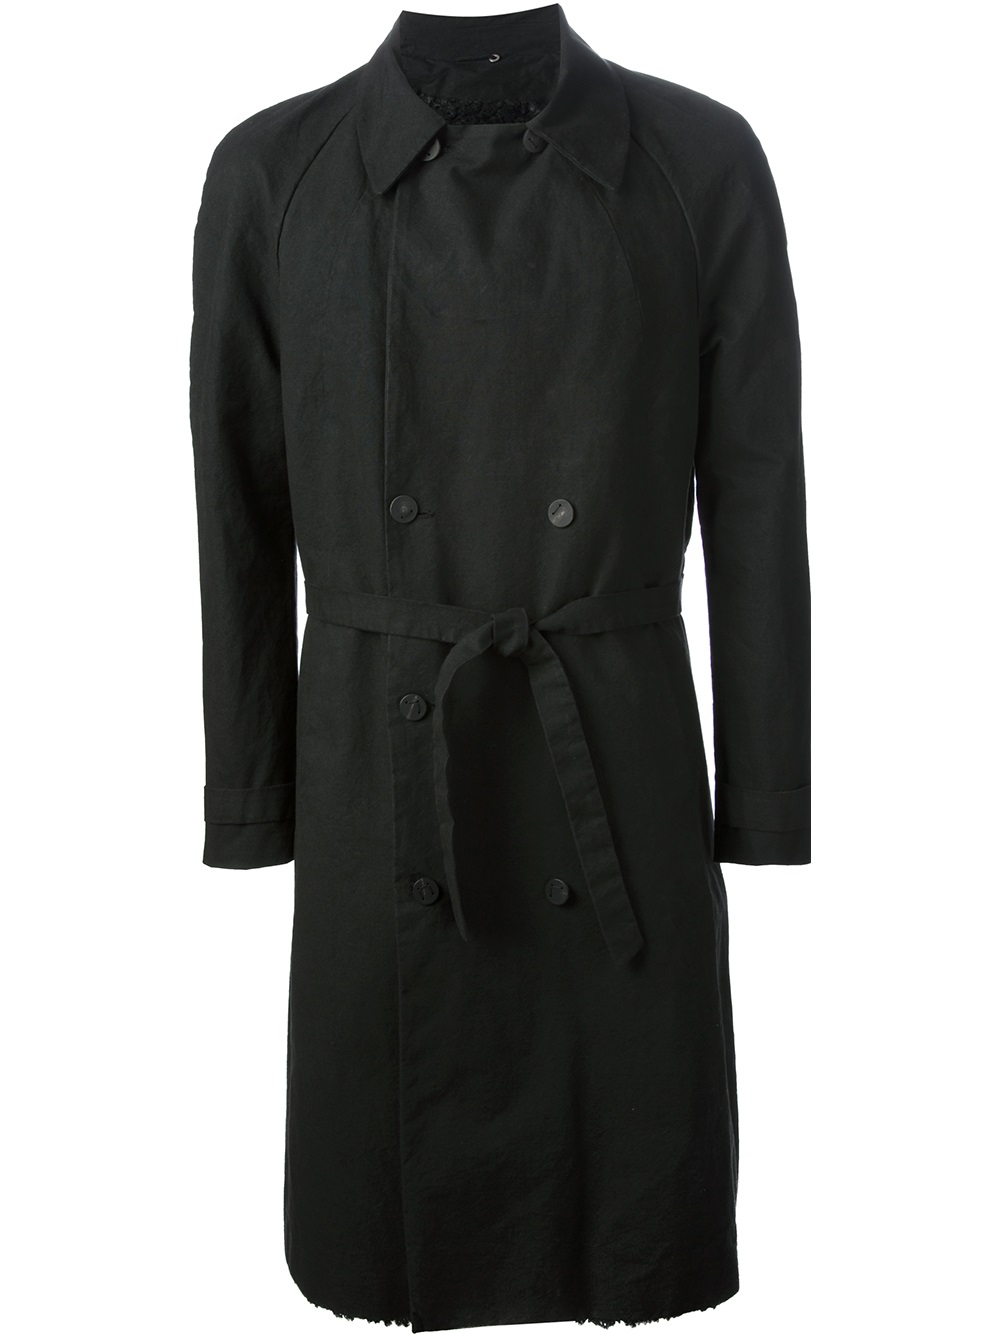 Label Under Construction Military Tent Trench Coat in Black for Men | Lyst